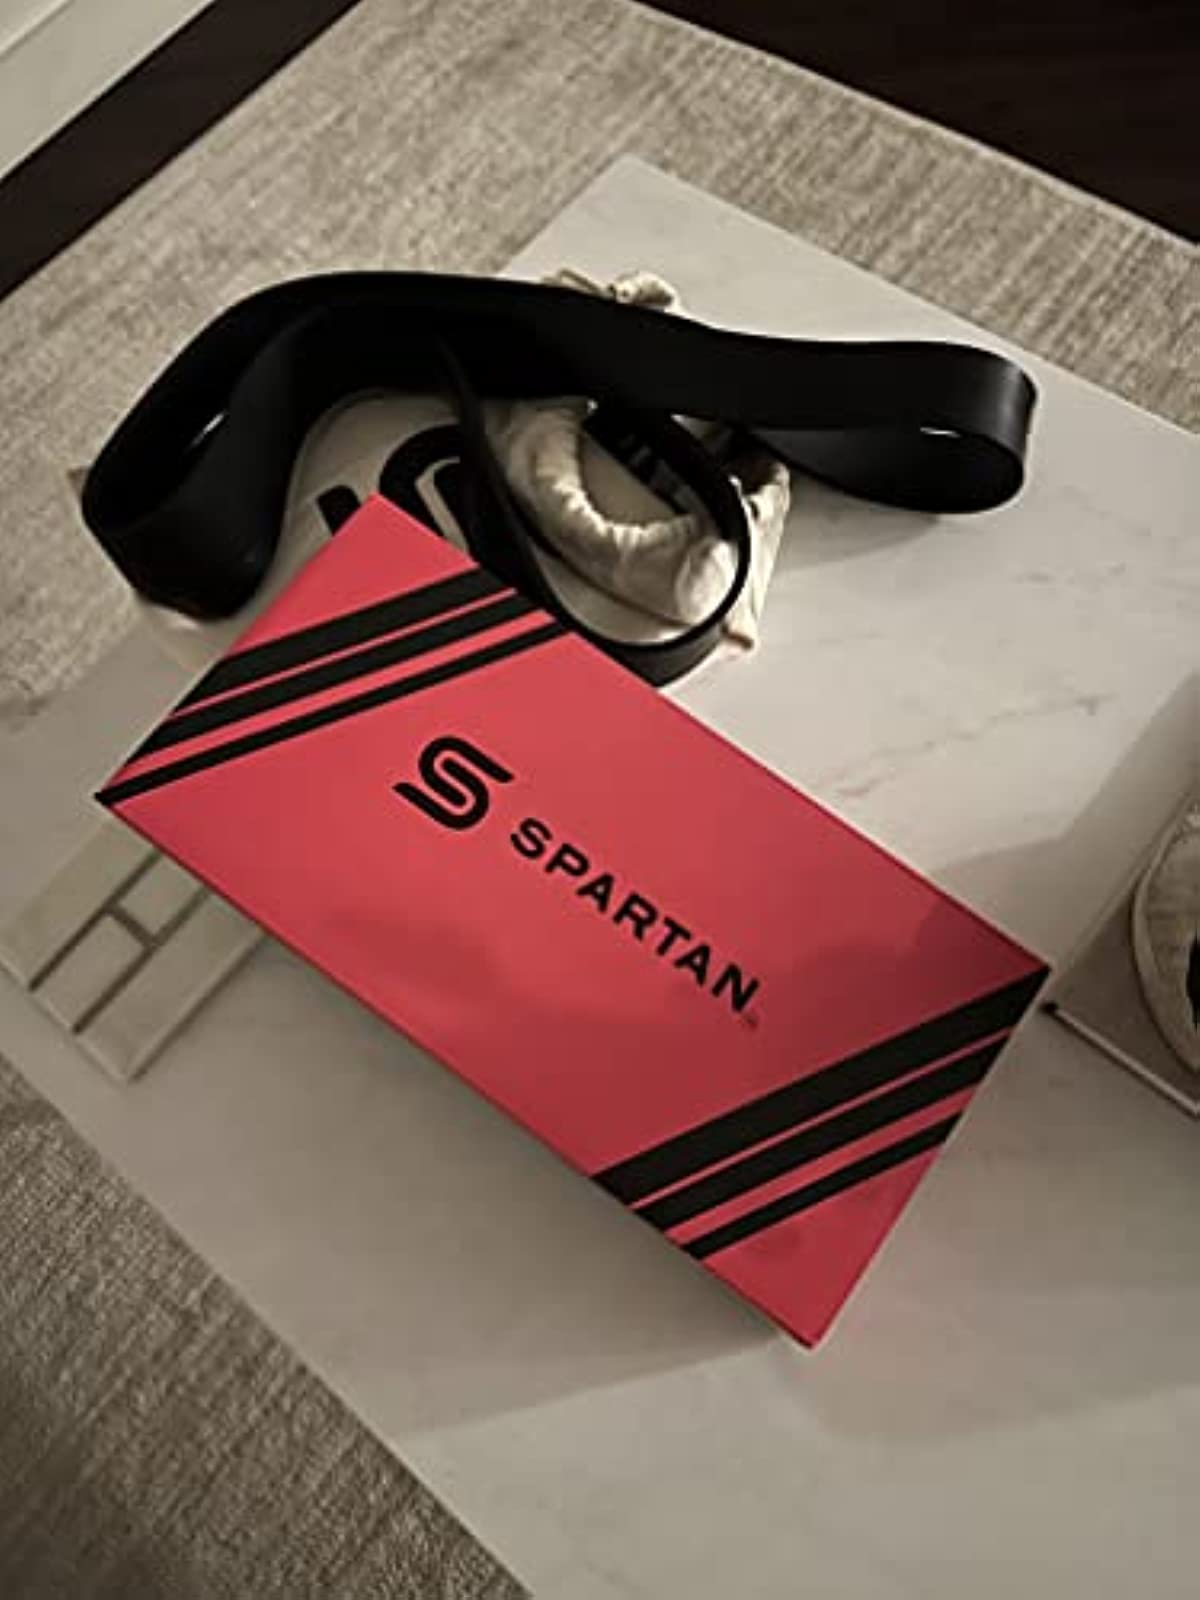 Spartan Resistance Band Set - Premium Quality Latex - 4 Resistance Levels - Sleek Black Bands - Perfect for Pull Ups, Warm Ups, Joint Mobs, Plyometric Exercises, Crossfit, and Power Lifting